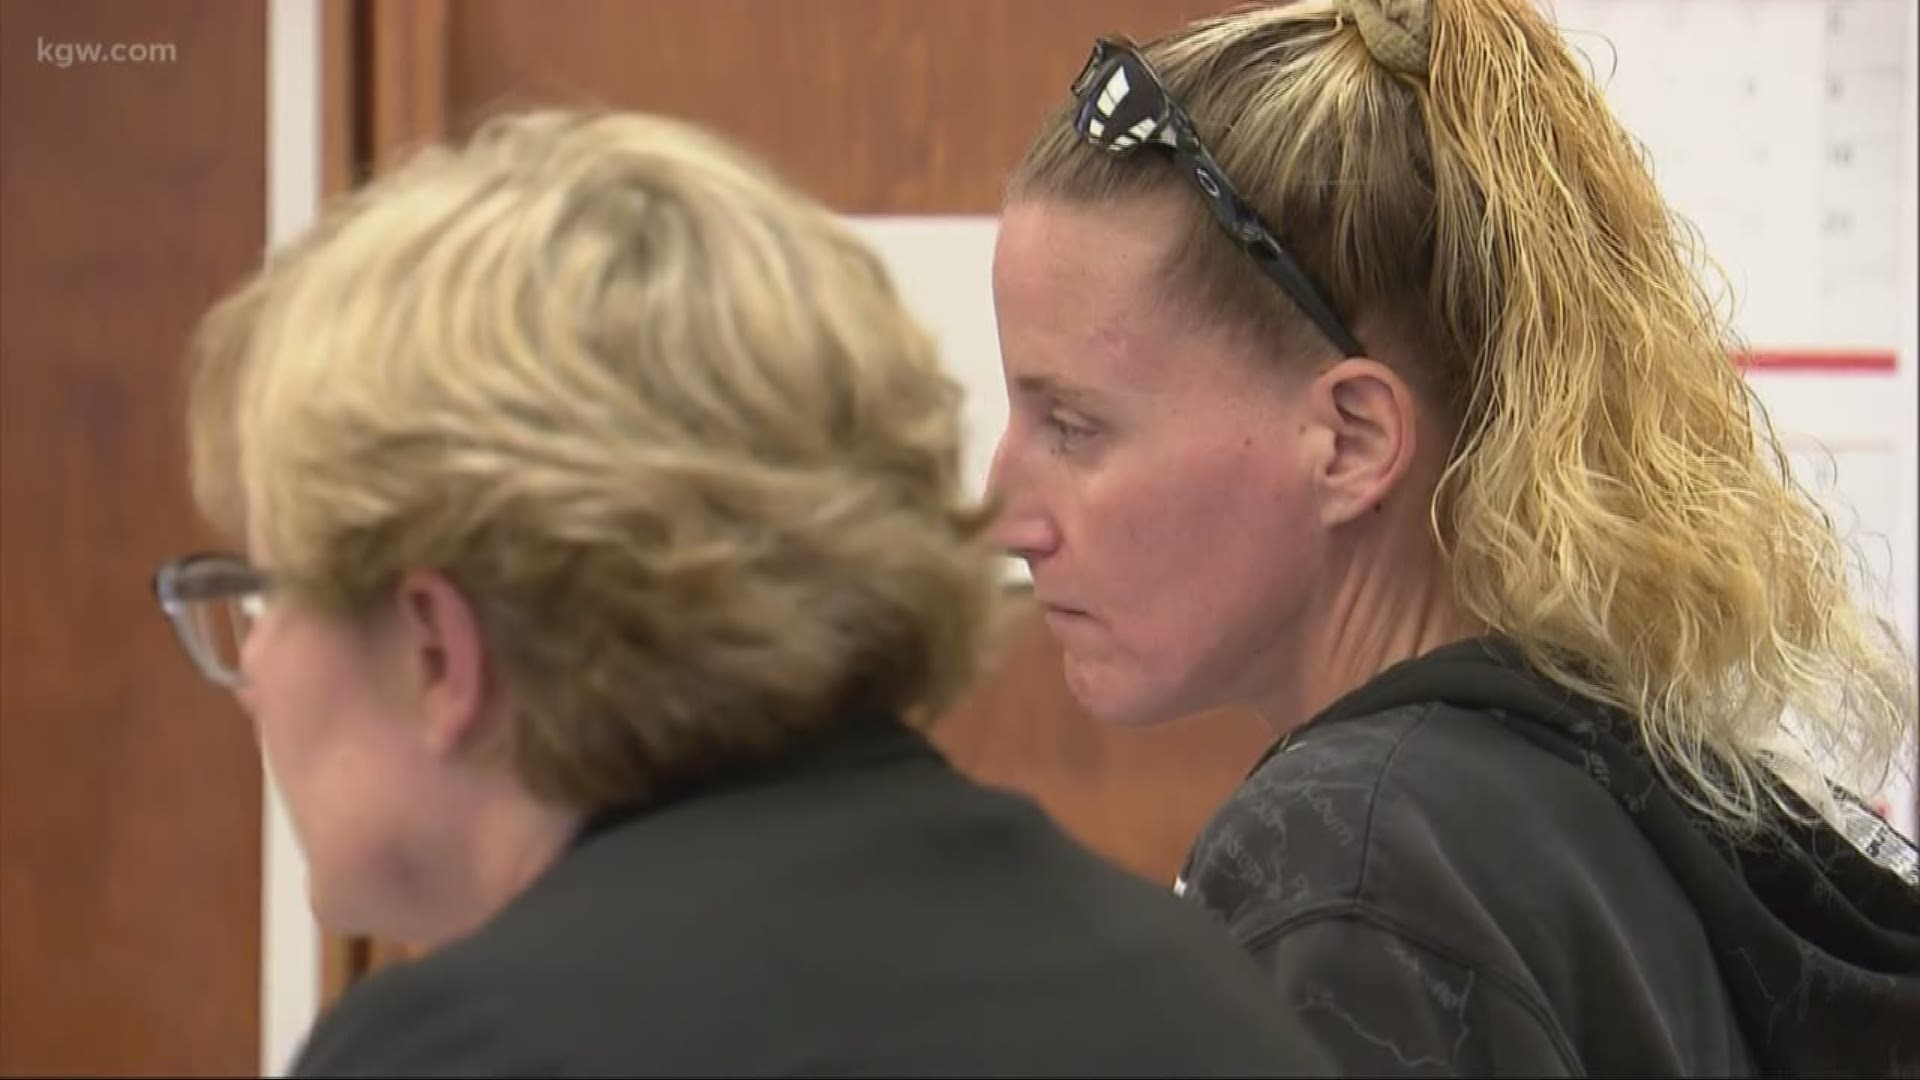 Woman who yelled racial slurs at black couple appears in court